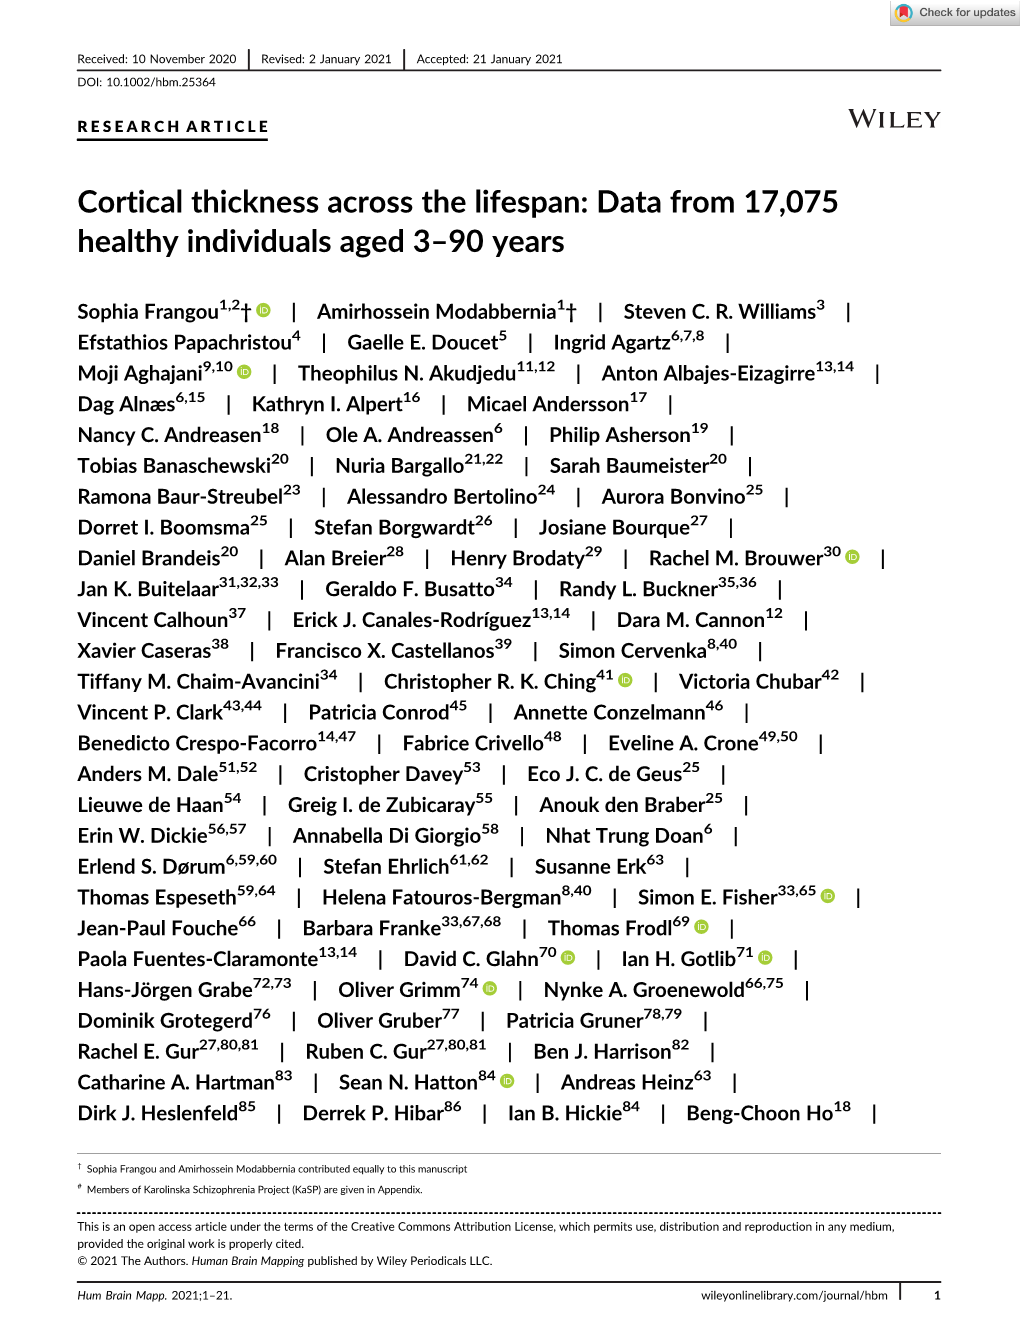 Cortical Thickness Across the Lifespan: Data from 17,075 Healthy Individuals Aged 3–90 Years